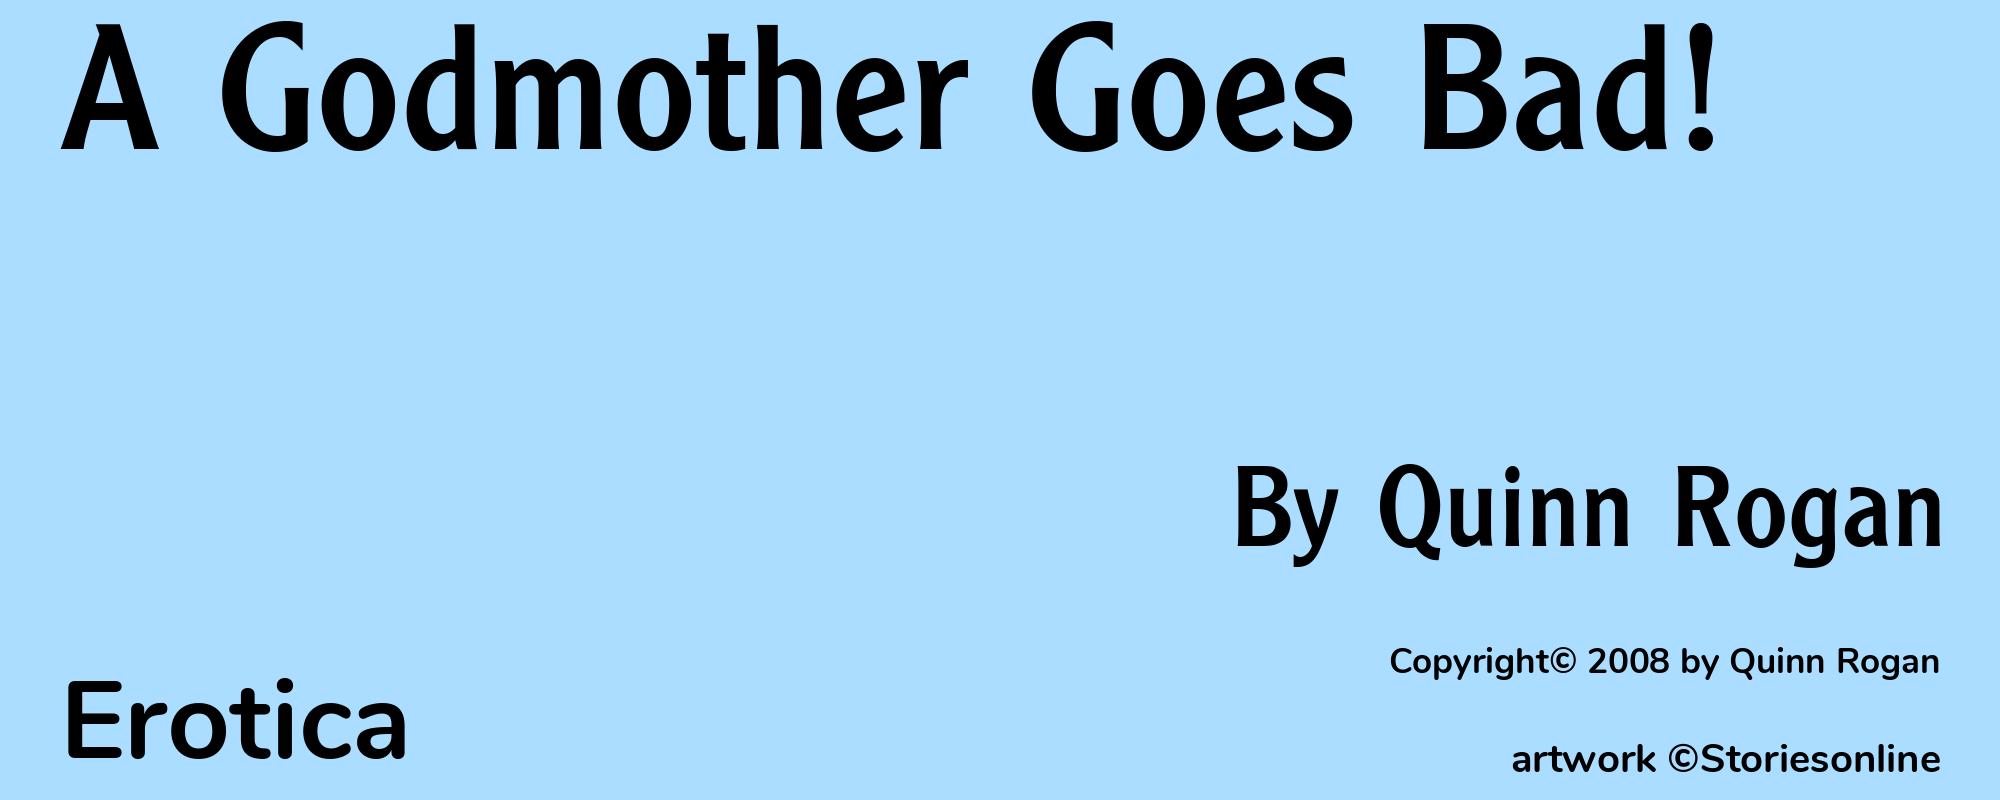 A Godmother Goes Bad! - Cover